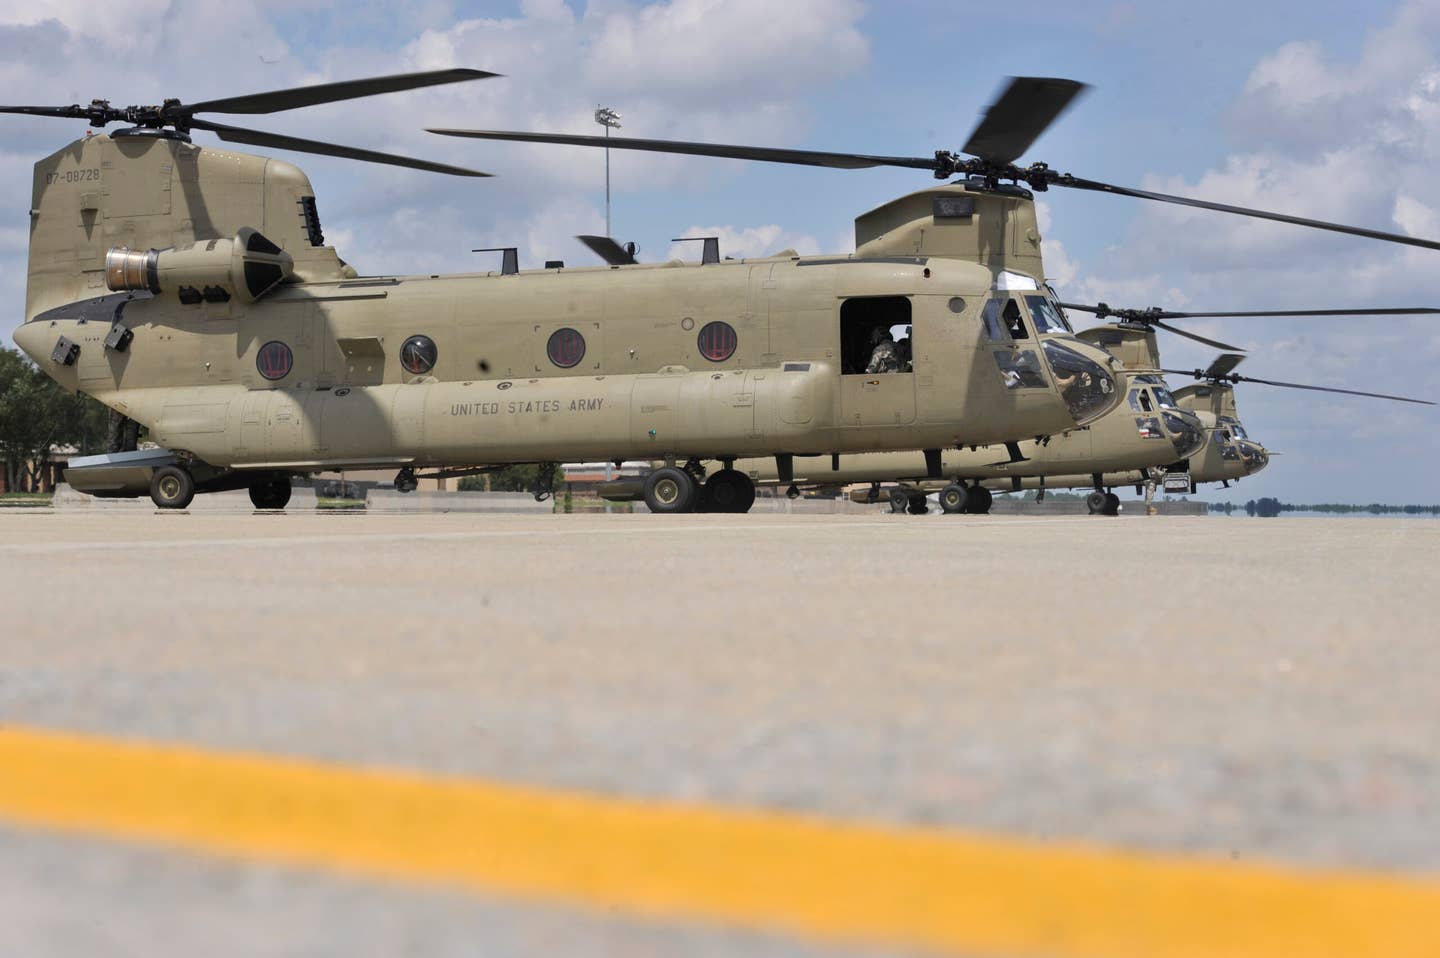 Three U.S. Army CH-47F sit on the flight line waiting to depart from Shaw Air Force Base, South Carolina, August 9, 2013. <em>U.S. Air Force photo by Airman 1st Class Jonathan Bass/Released</em>